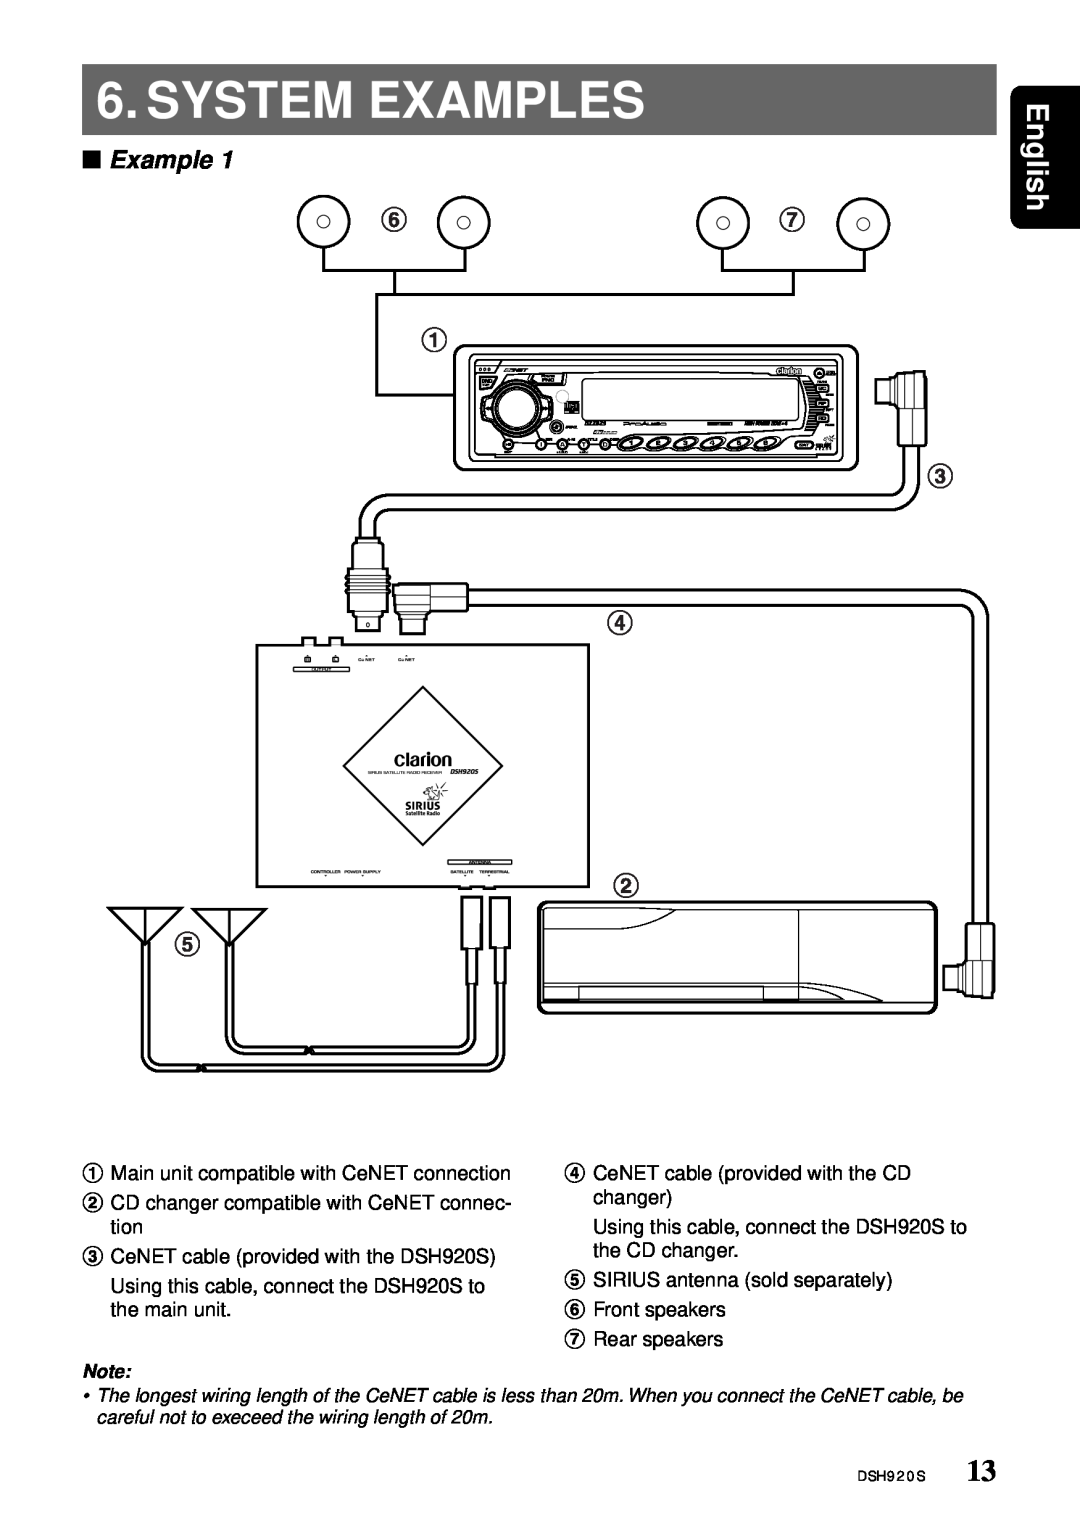 Clarion DSH920S owner manual System Examples, English 